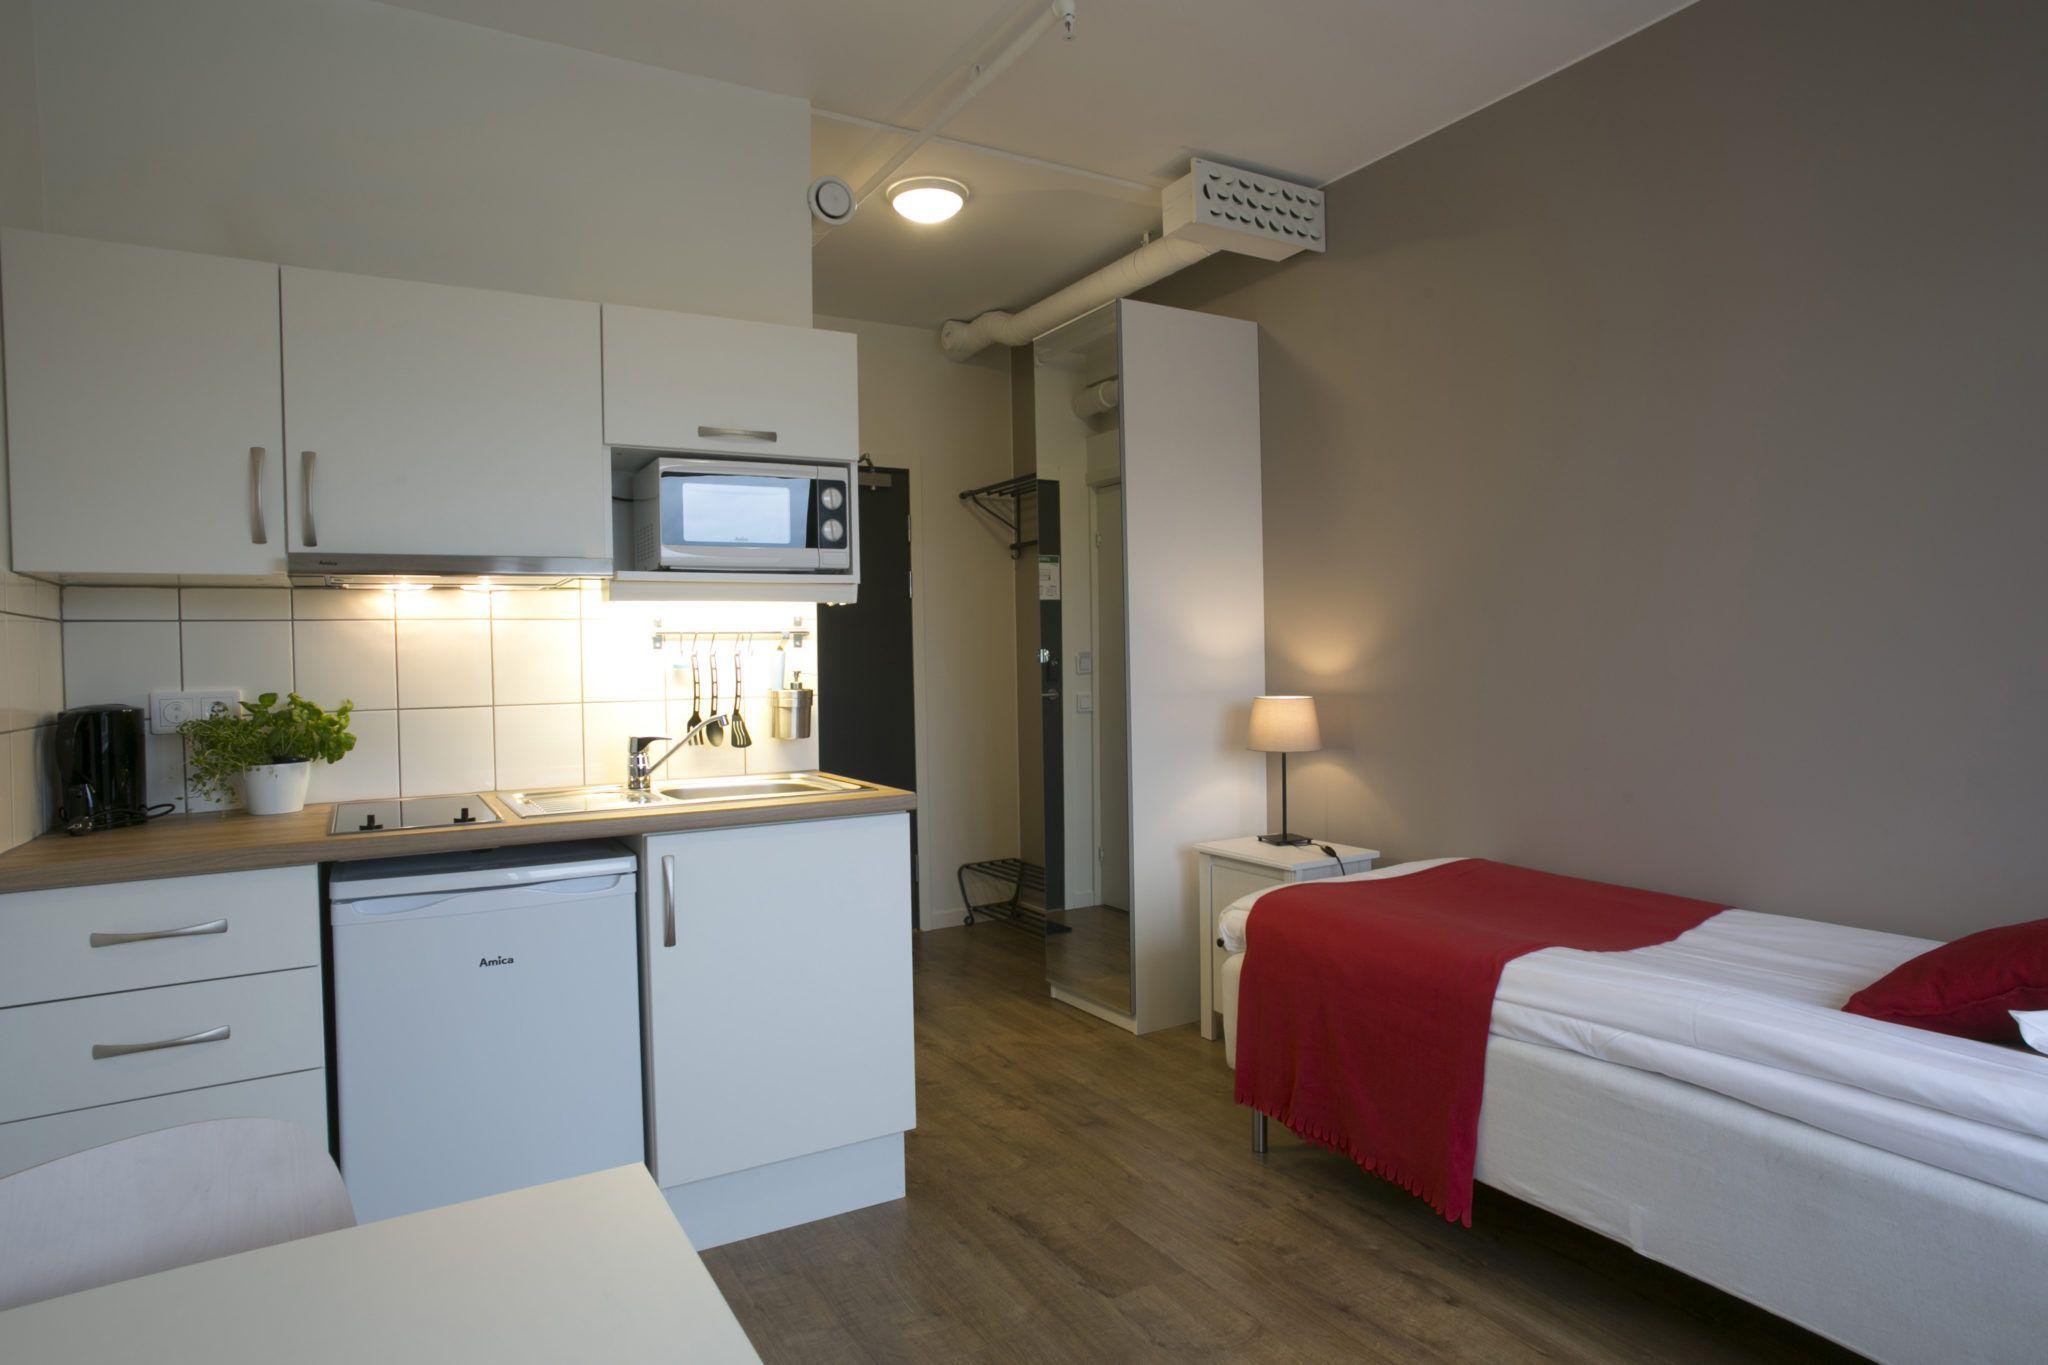 Our studio apartments is 17-19 sqm and has a fully equipped kitchenette with a stove, fridge with freezing compartment, microwave, kettle, dining table with chairs and a separate sitting area. 1 x 90 cm bed with pillow, duvet and bedlinnen. Bathroom with a shower and towels. Free Wi-Fi and Smart-Tv in every apartment and wardrobe with mirror door. Laundry room with iron and ironing boards and garbage room on each floor. Free access to the gym Puls & Traning.